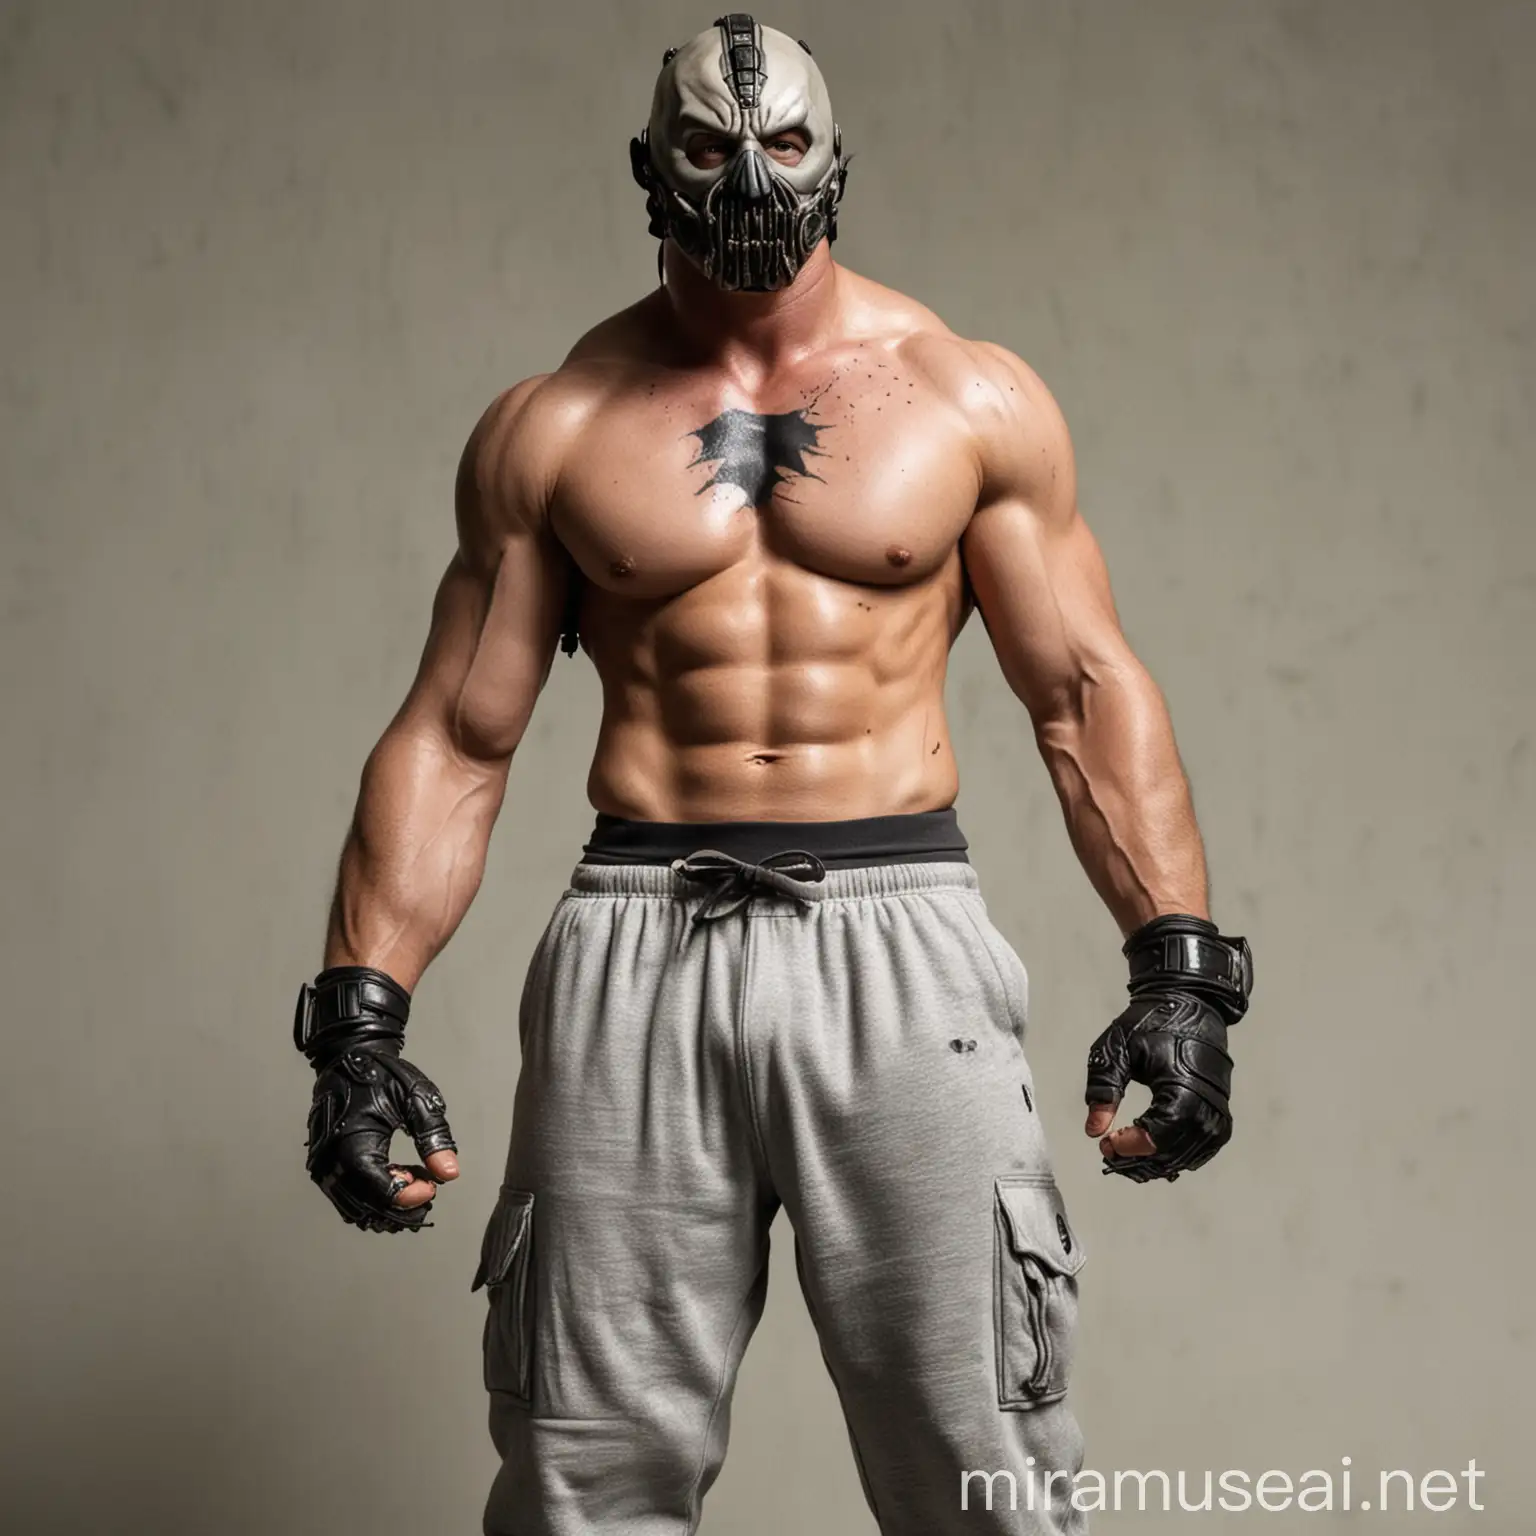 Bane with mask, shirtless with scars, wearing grey sweat pants and jordans